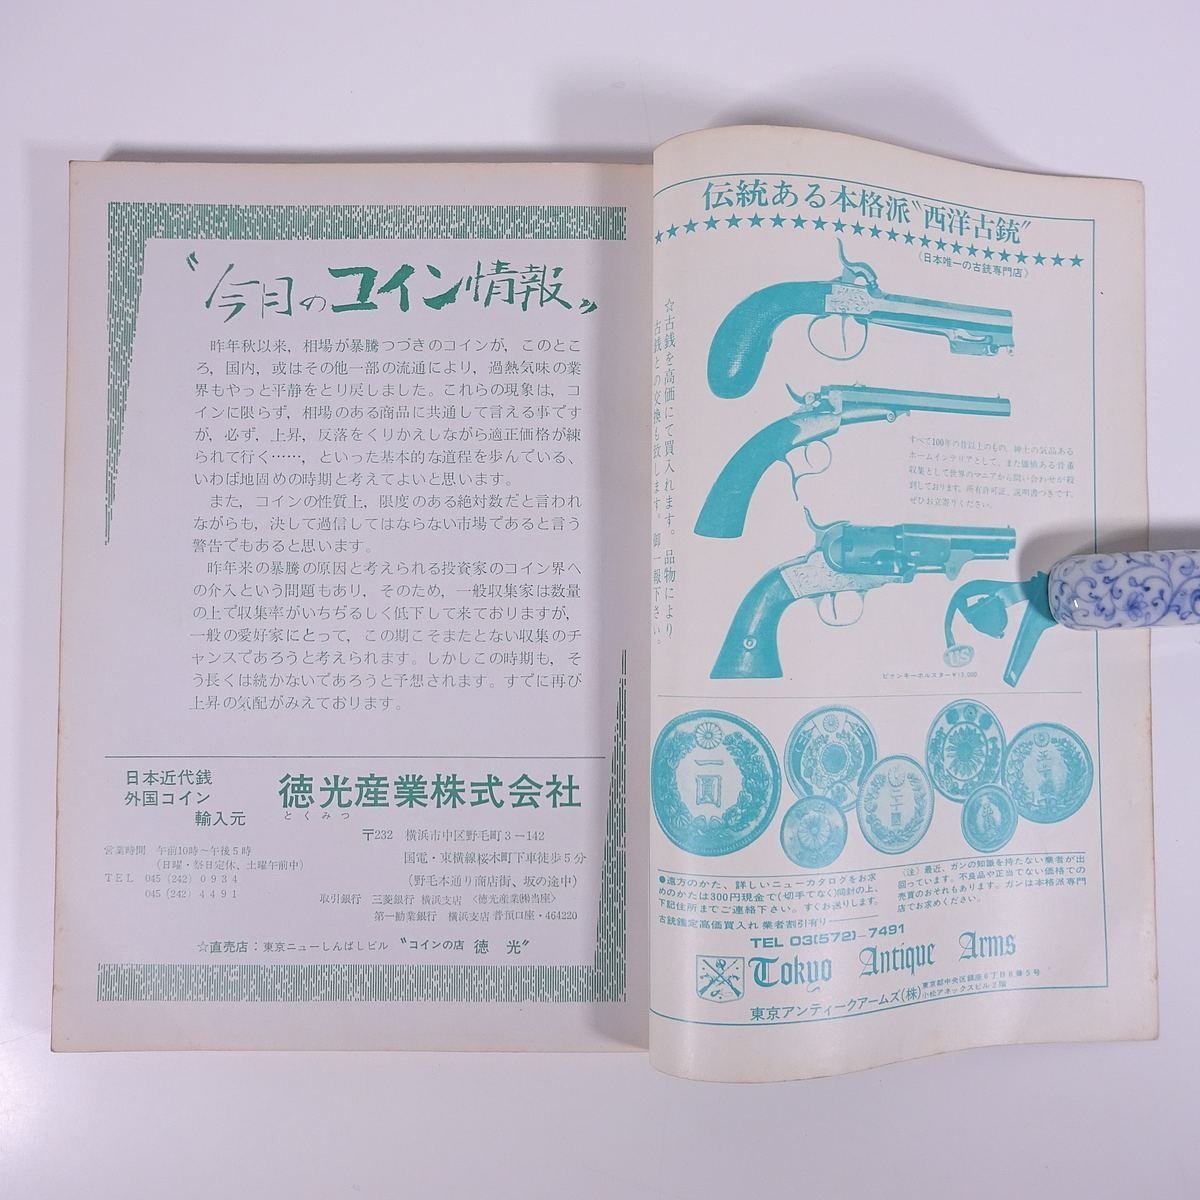  monthly bo naan The 1973/5. writing company magazine right . exist coin. speciality magazine money note coin special collection *. color japanese modern times note 5 Japan Bank ticket ( that 4) another 